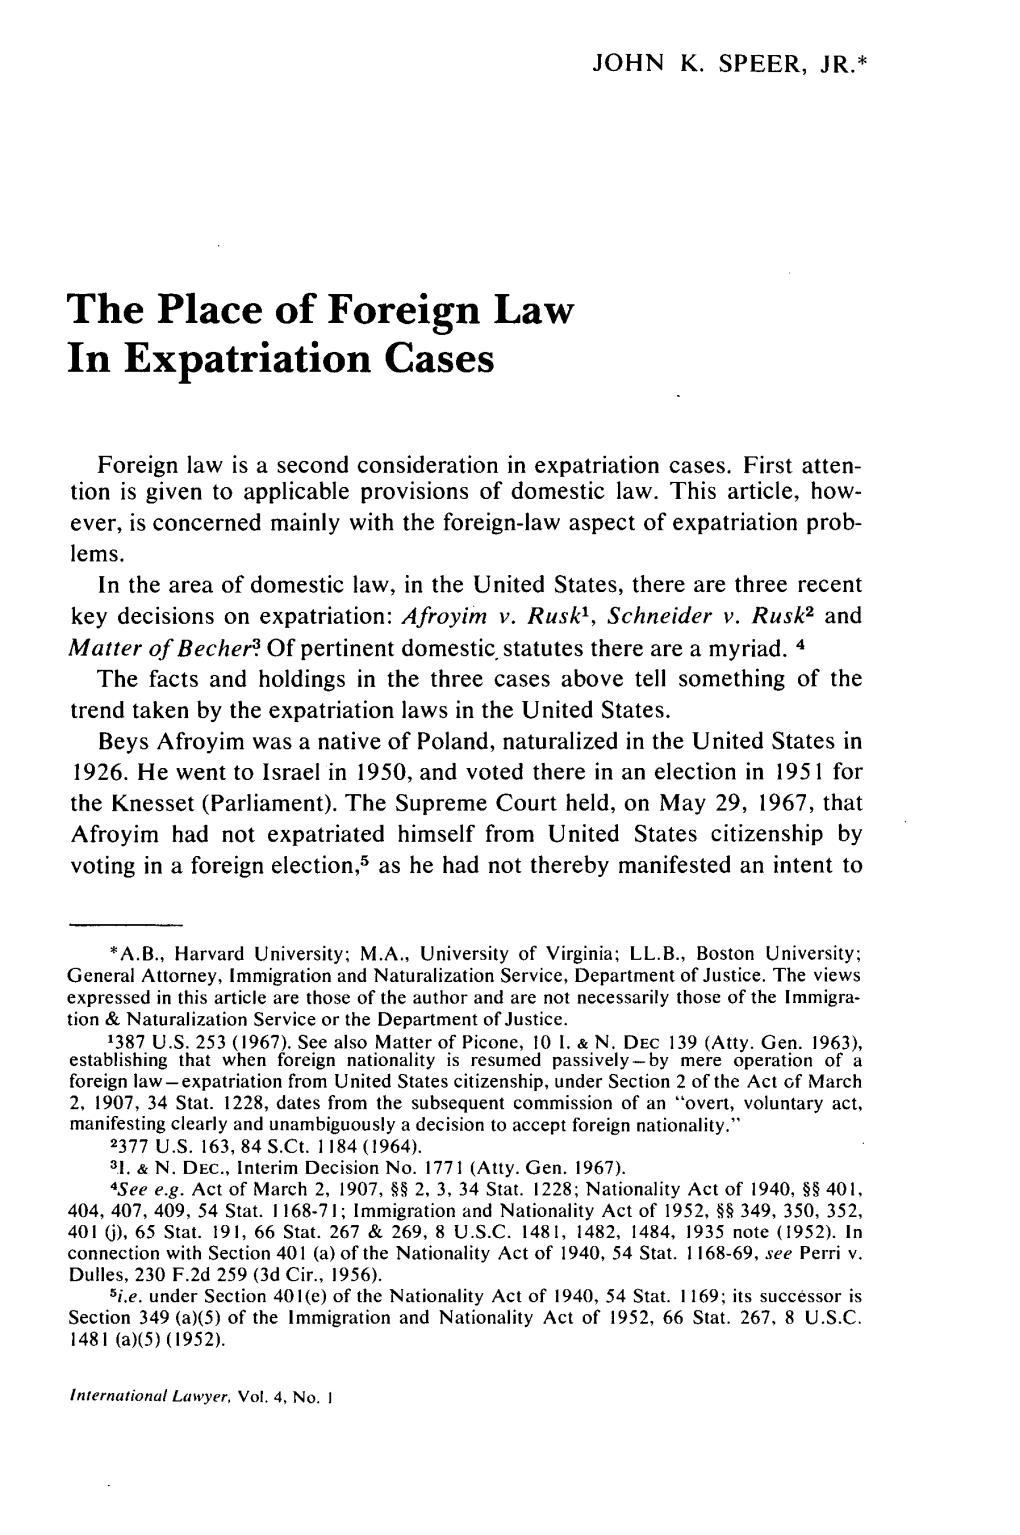 The Place of Foreign Law in Expatriation Cases